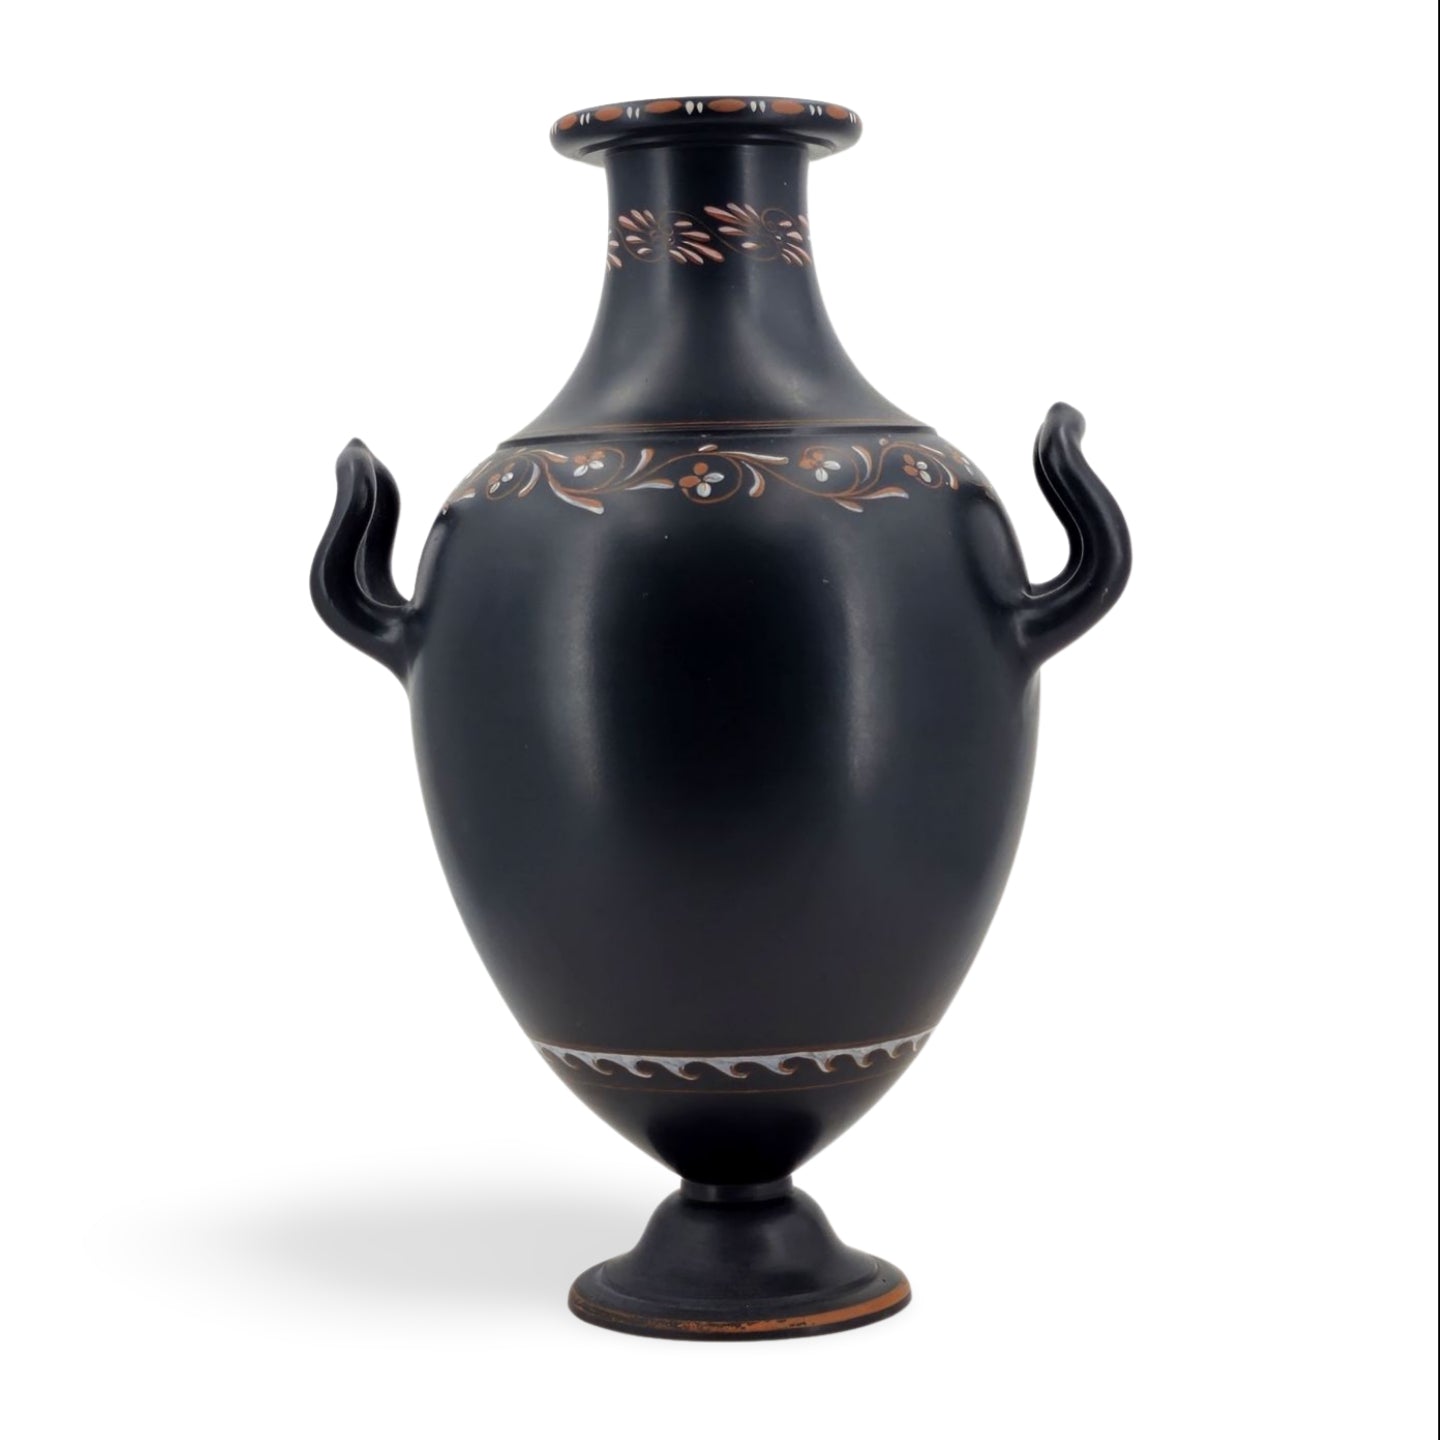 Grisaille painted basalt vase with handles. Bottle shape. Satyr.